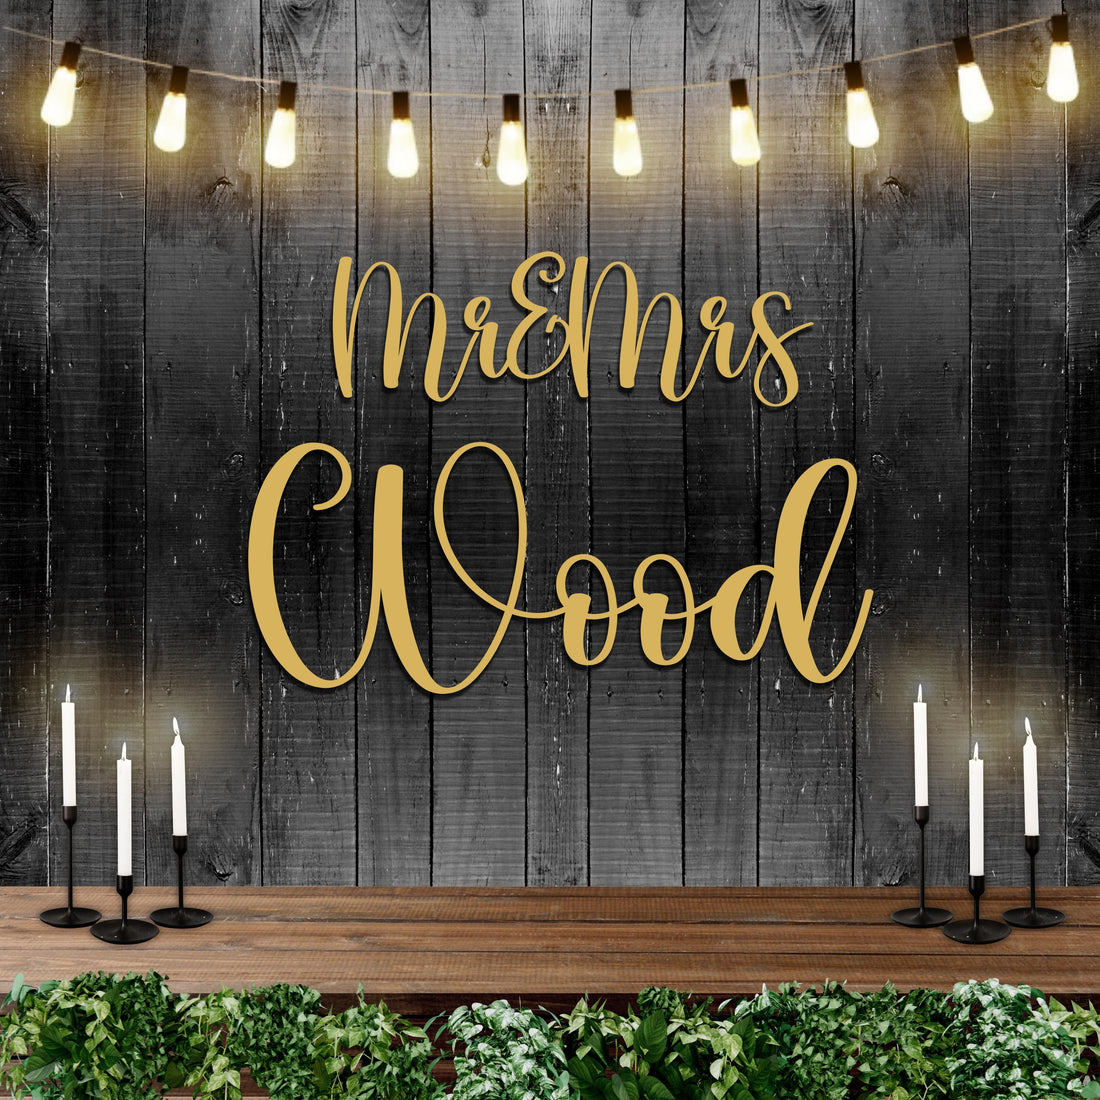 Custom Wooden/ Acrylic Mr & Mrs Last Name Wedding Sign, Personalised Family, Business Name Signage, Hedge Photo Prop, Event Wall Hoop, Bridal Shower, Engagement, Anniversary, Stag Party Backdrop Decor